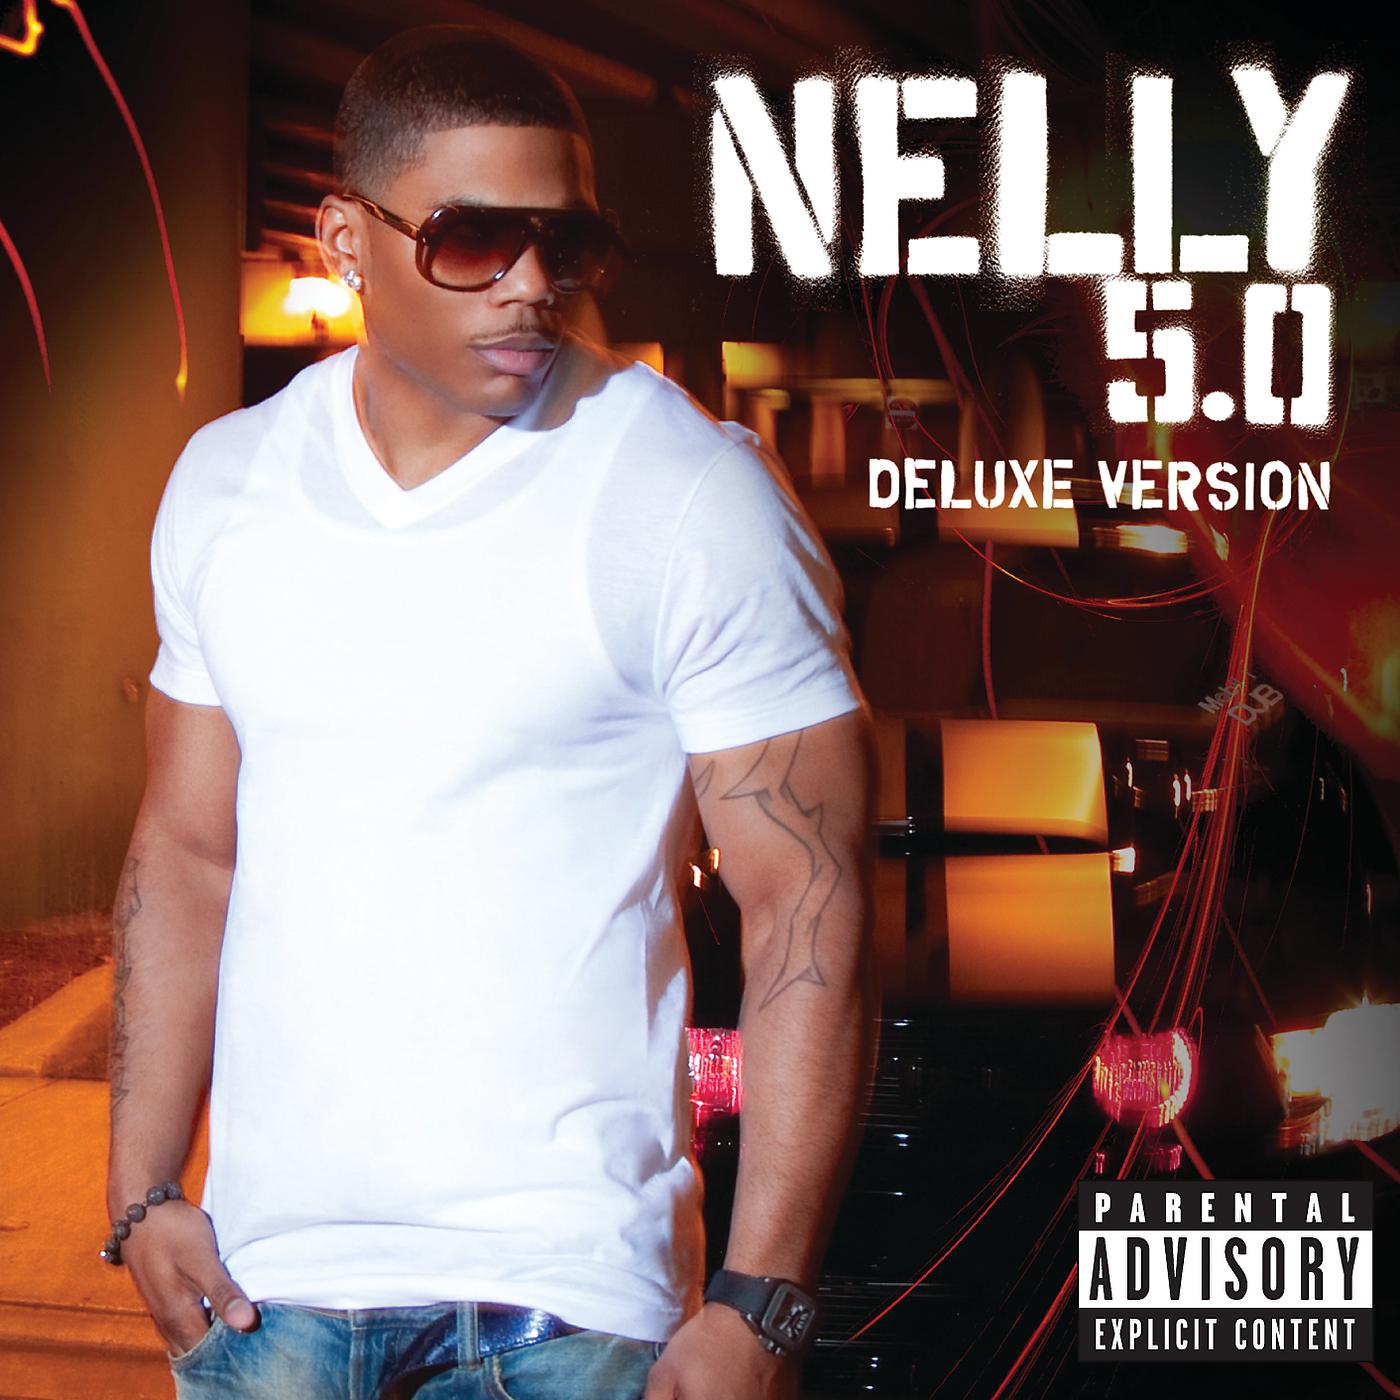 Just a dream paul. Nelly рэпер. Nelly - 5.0. Nelly just a Dream обложка. Nelly album 5.0.